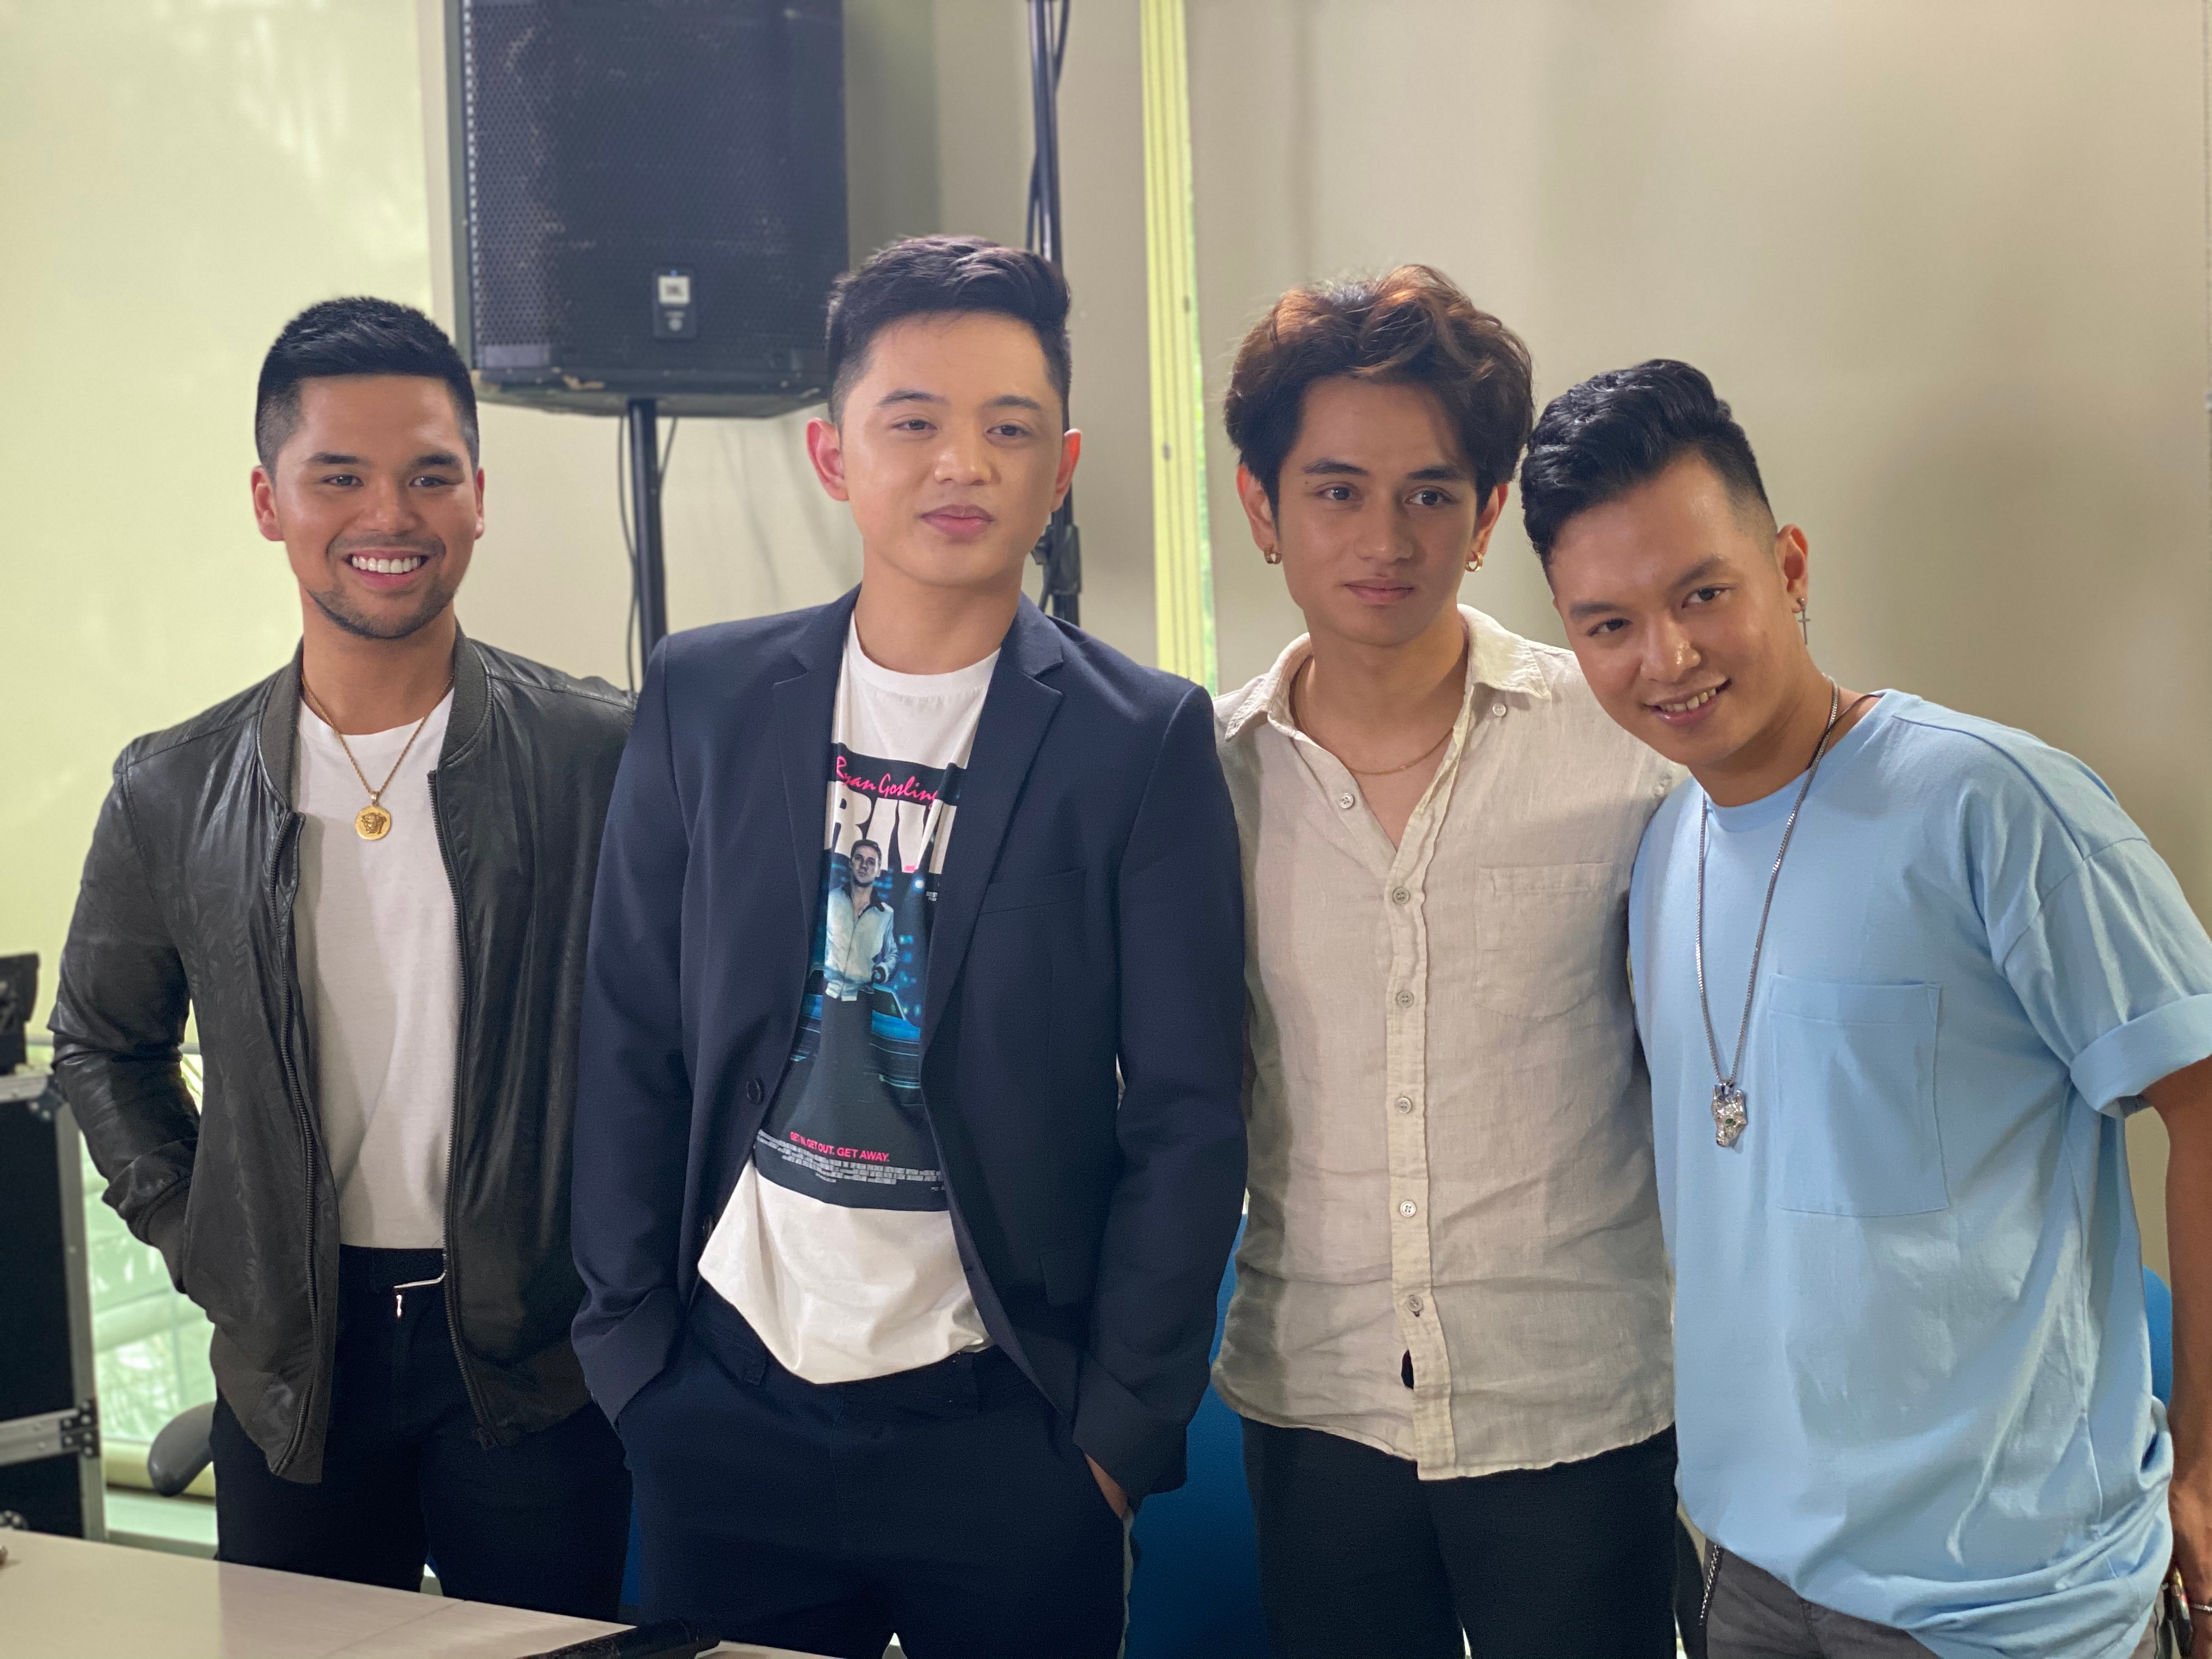 Song Feels concert with ABS CBN Music artists JMKO, Jeremy G, Miguel Odron, and Sam Mangubat (2)